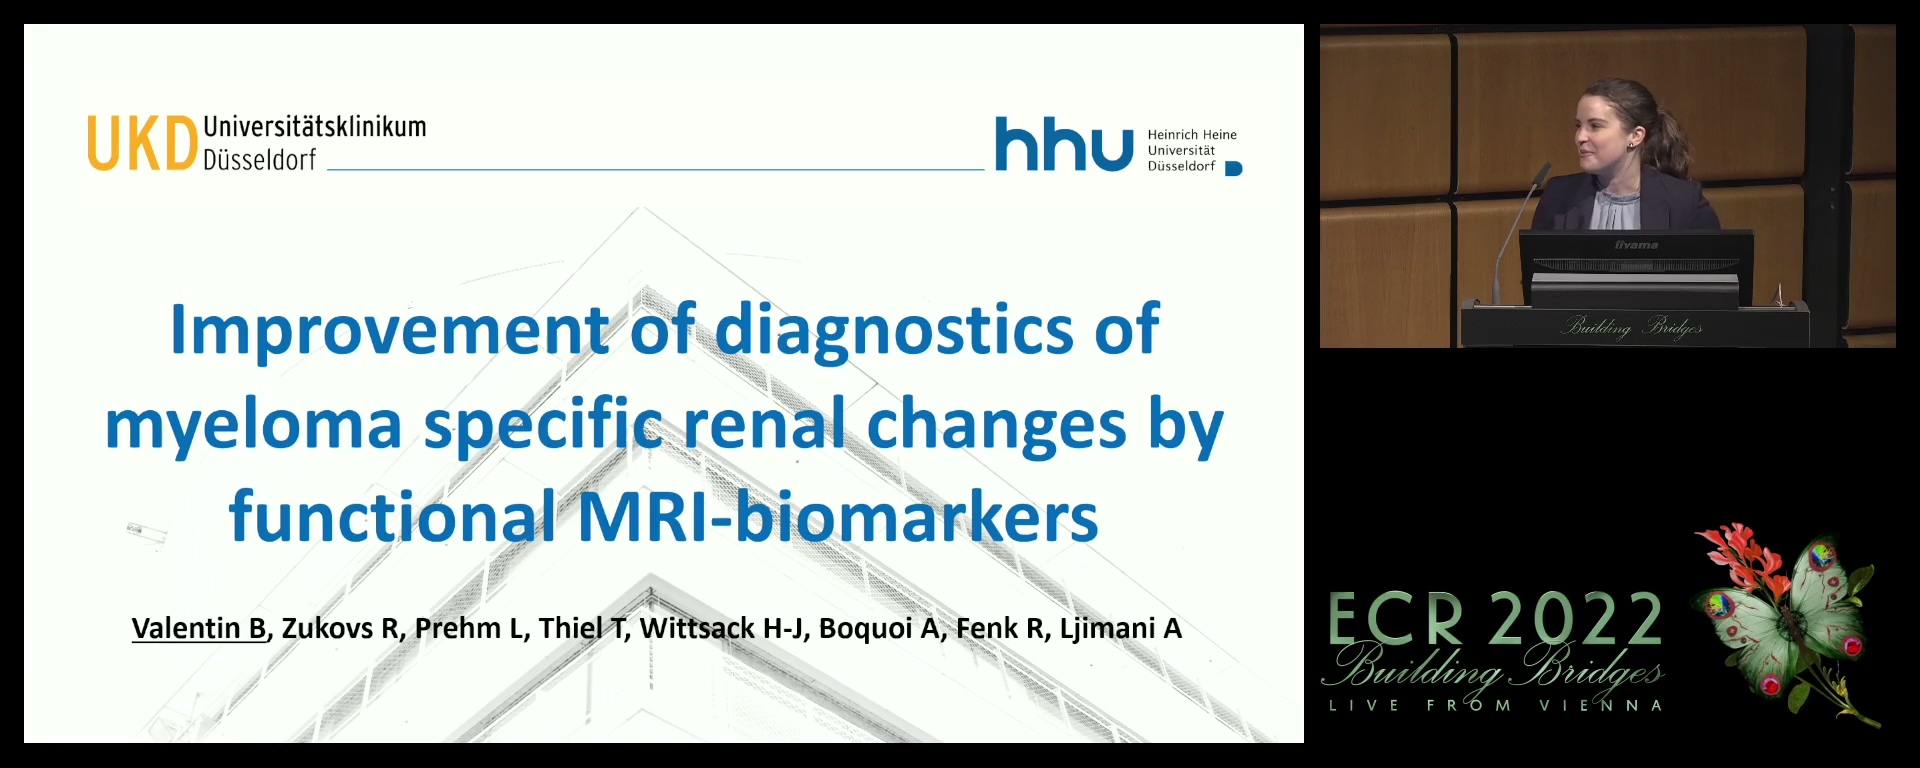 Improvement of diagnostics of myeloma specific renal changes by functional MRI-biomarkers